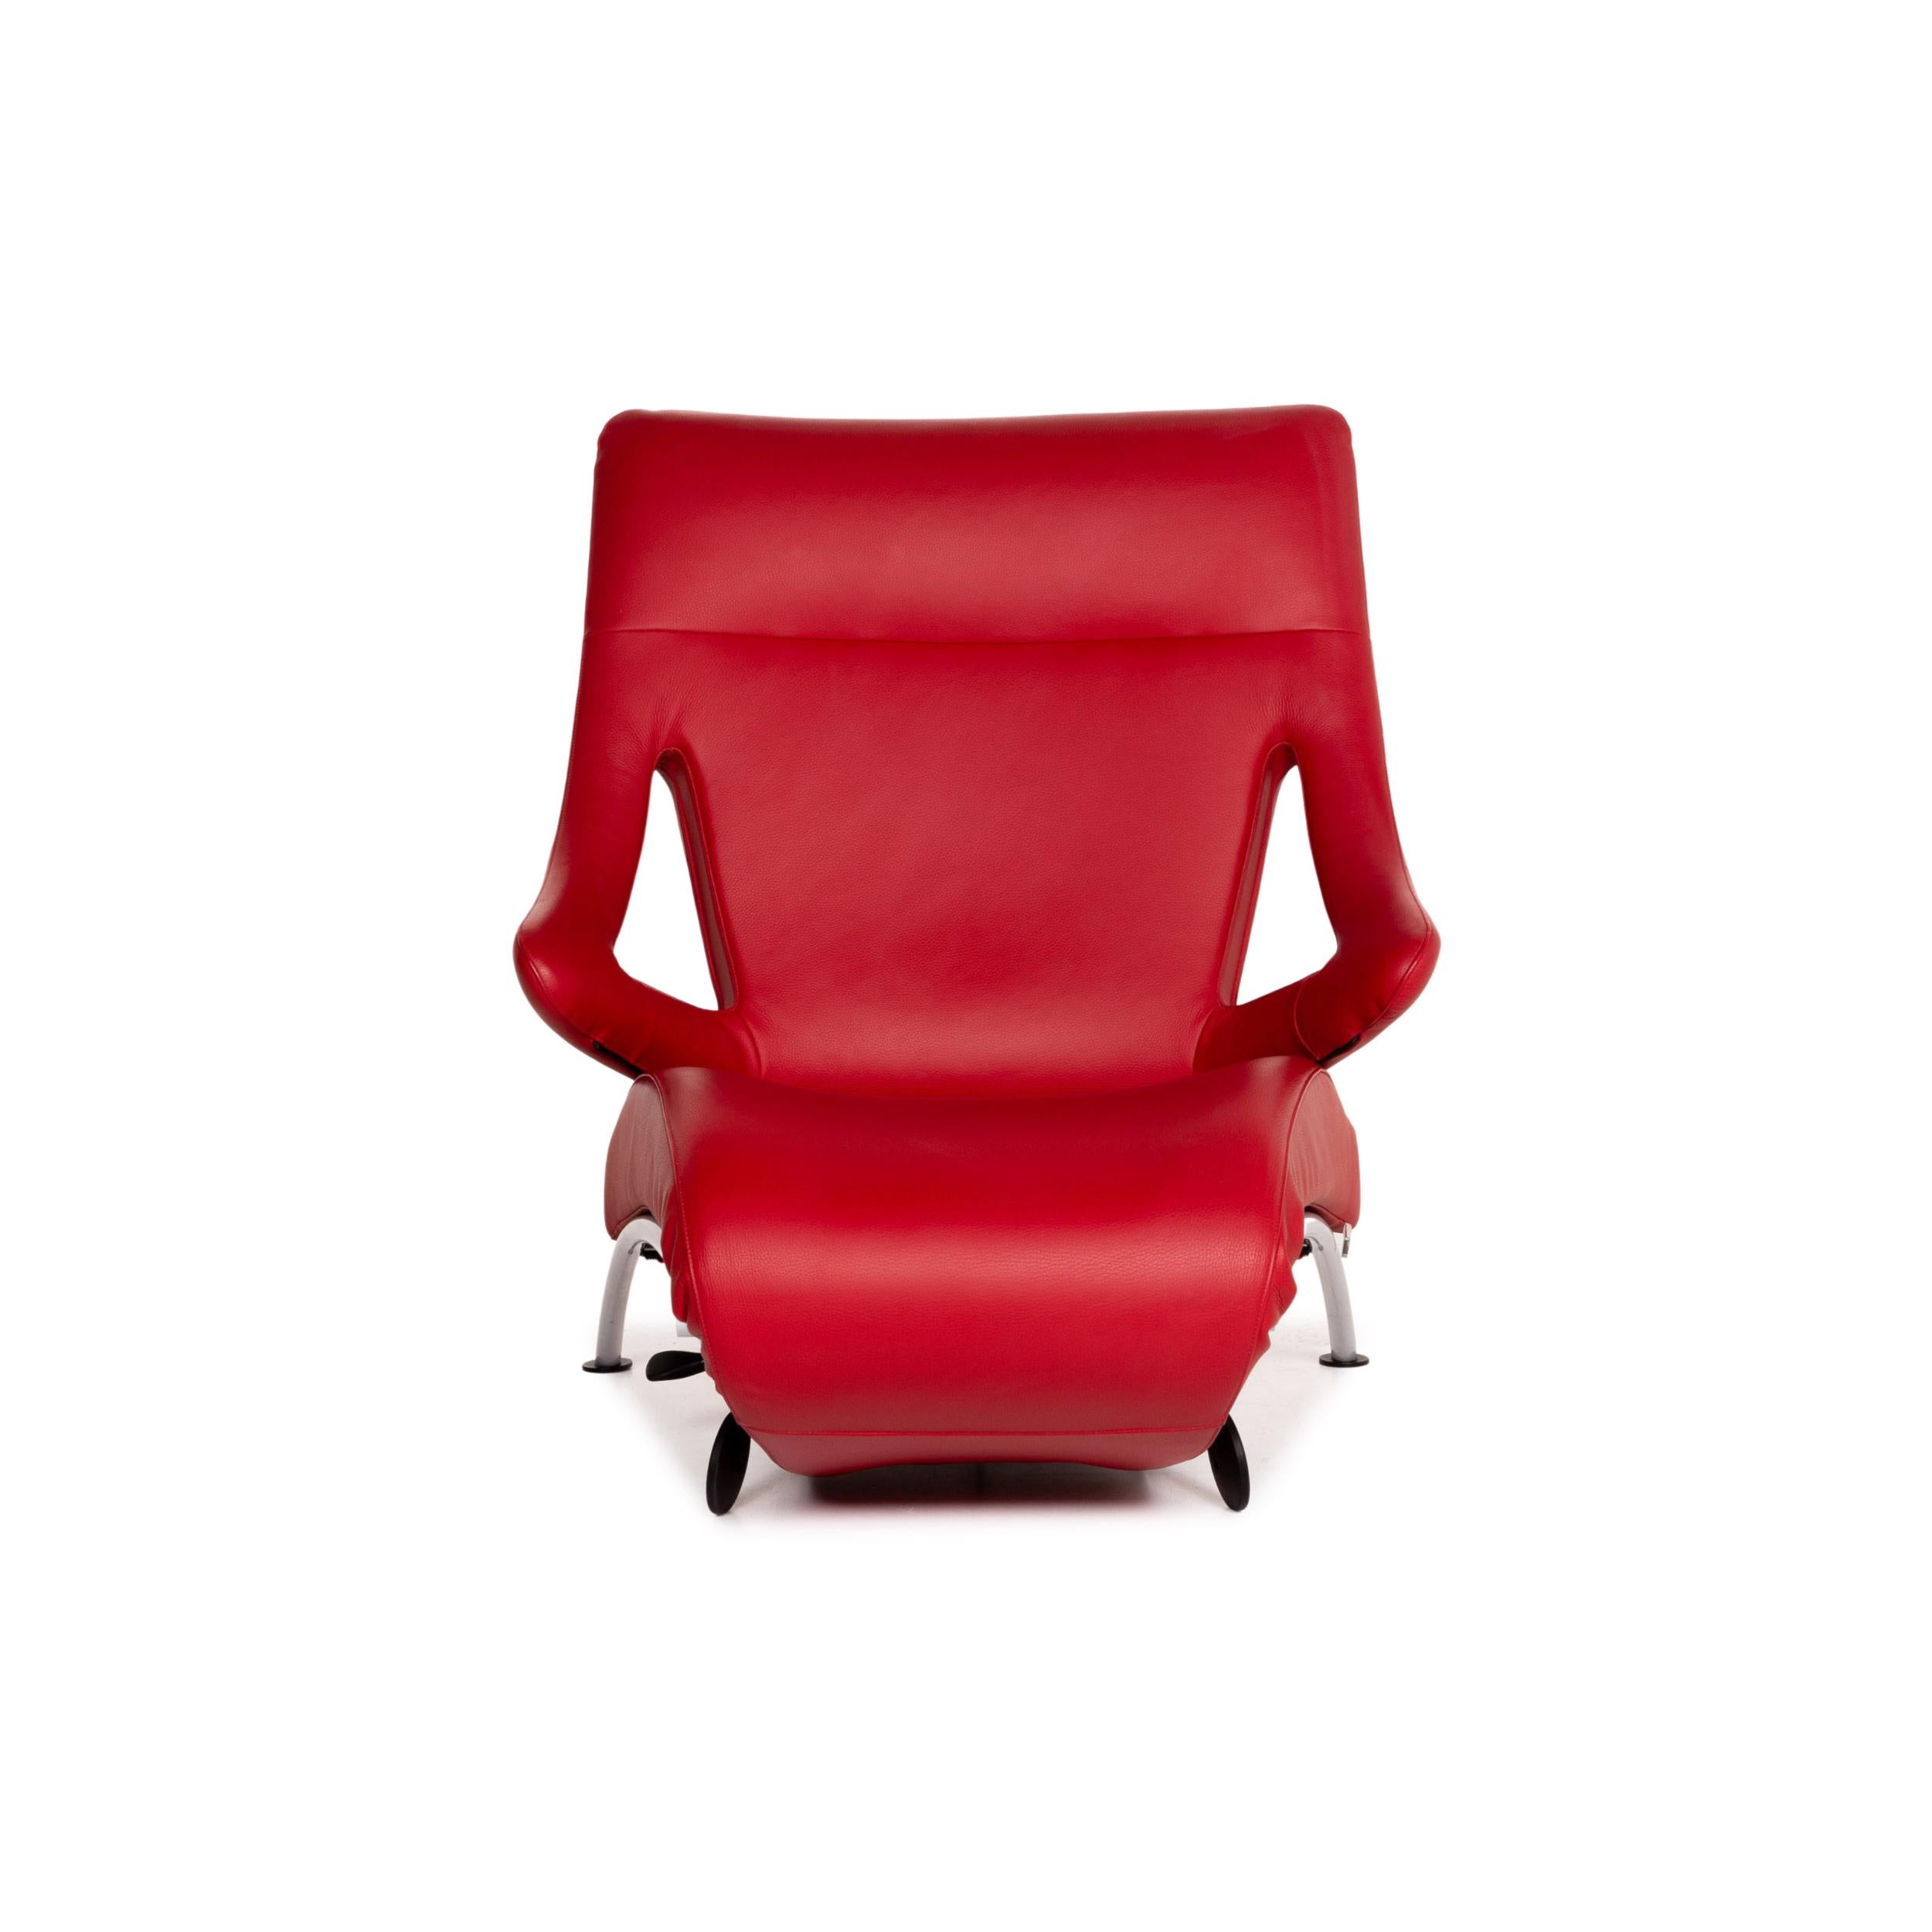 WK Wohnen Solo 699 Leather Armchair Red Lounger Relaxation Function 3